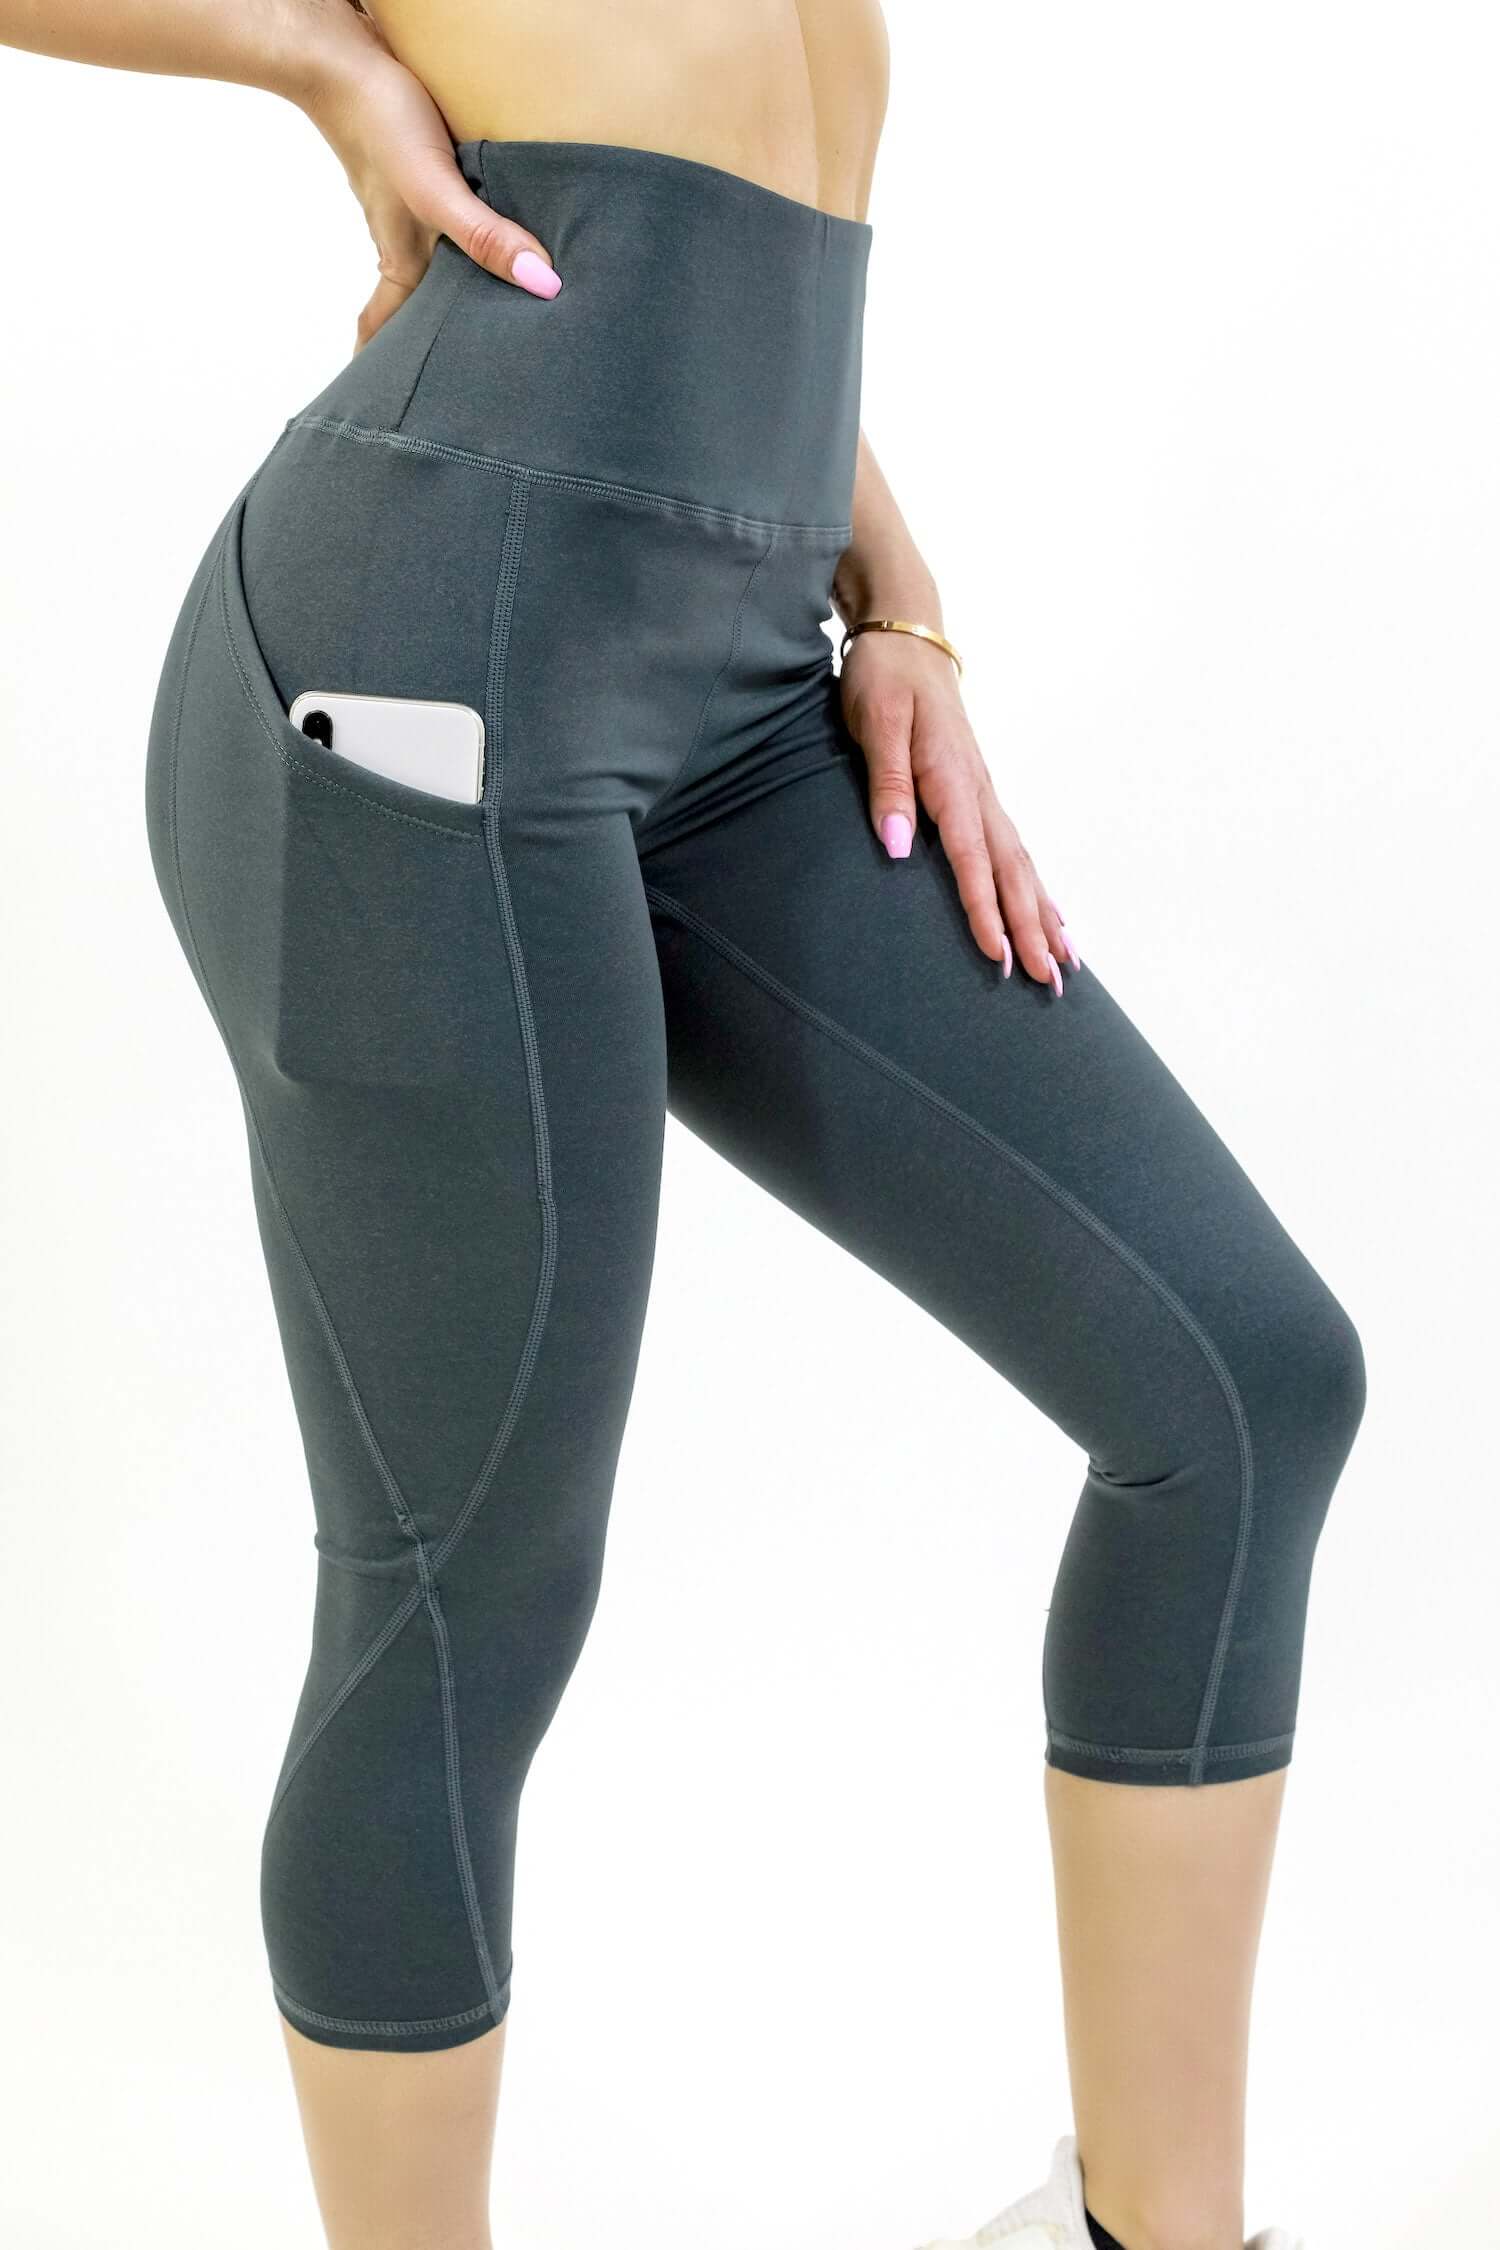 L'espace Low-Waisted Capri Leggings with Mesh Panels and Reflective Strips